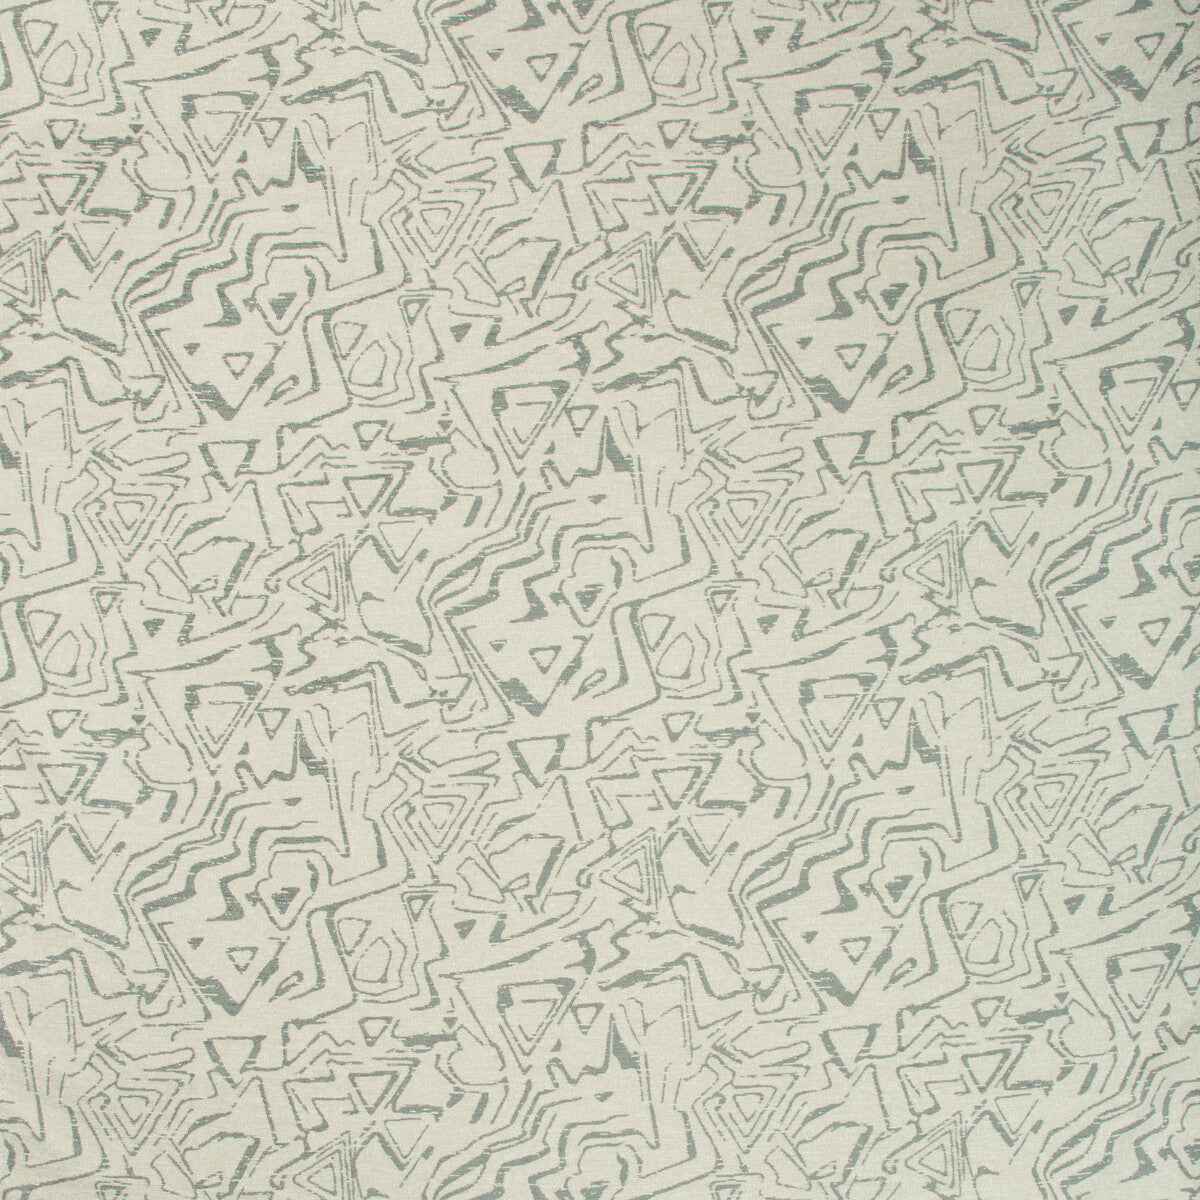 Kravet Contract fabric in 35030-11 color - pattern 35030.11.0 - by Kravet Contract in the Incase Crypton Gis collection